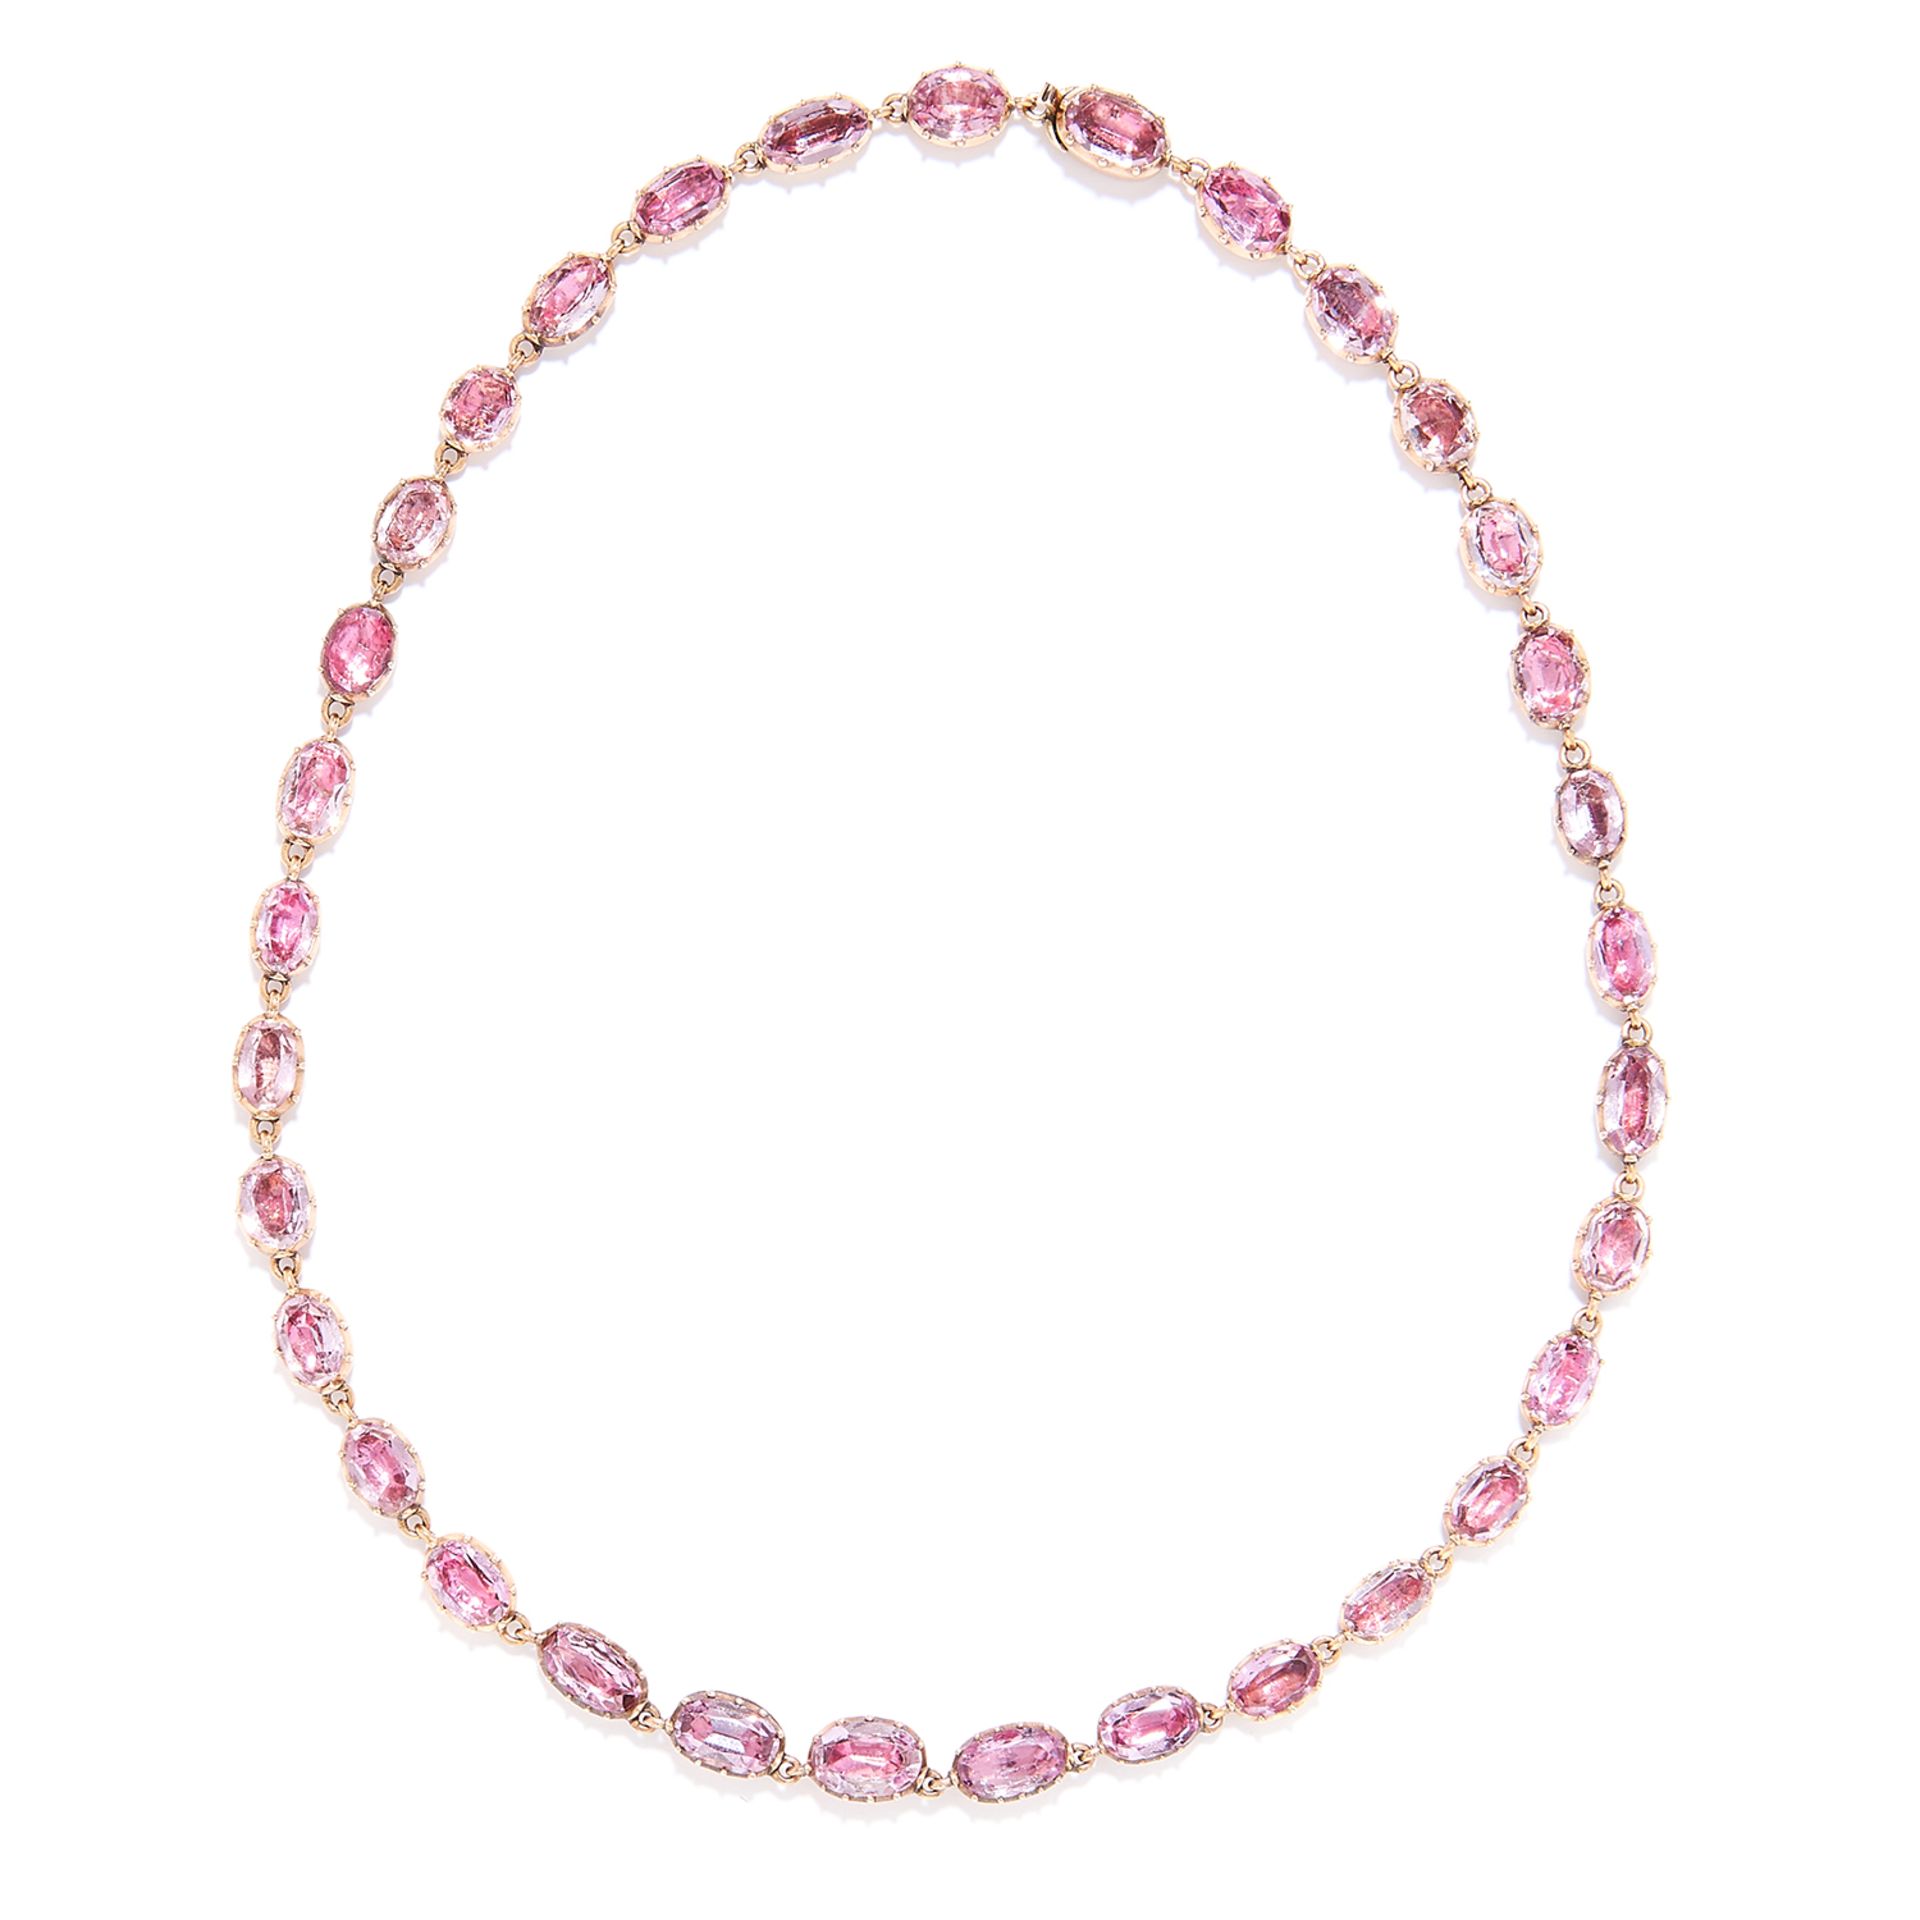 ANTIQUE PINK TOPAZ RIVIERA NECKLACE, EARLY 19TH CENTURY in high carat yellow gold, set with oval cut